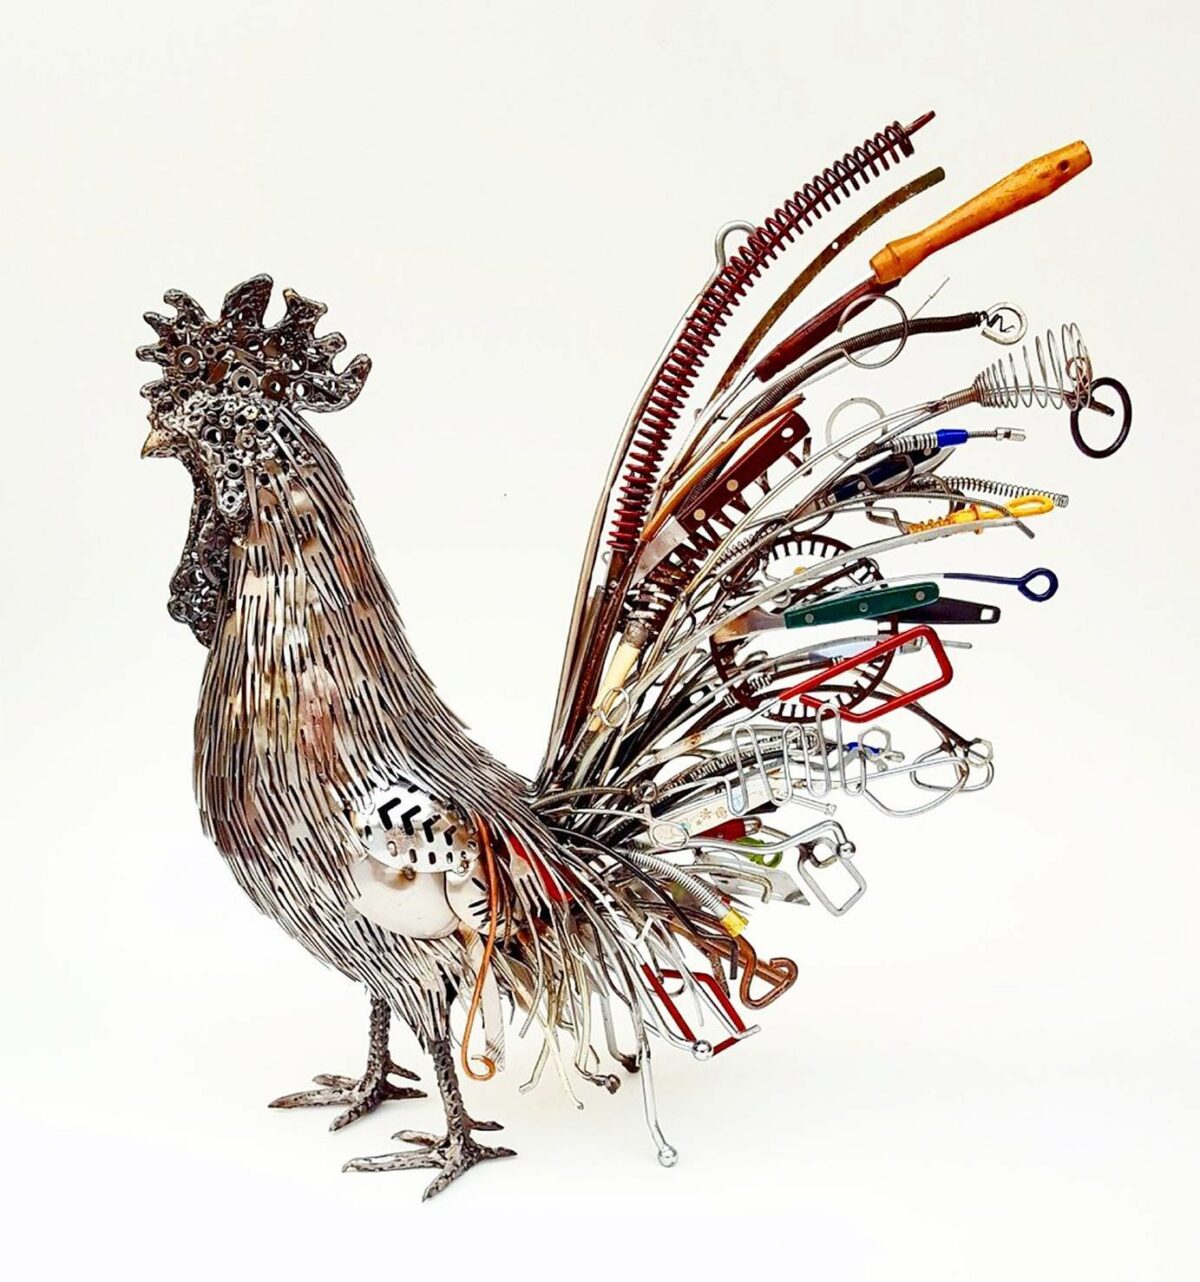 Incredible Welded Sculptures Made From Scrap Metal By Brian Mock 15 1